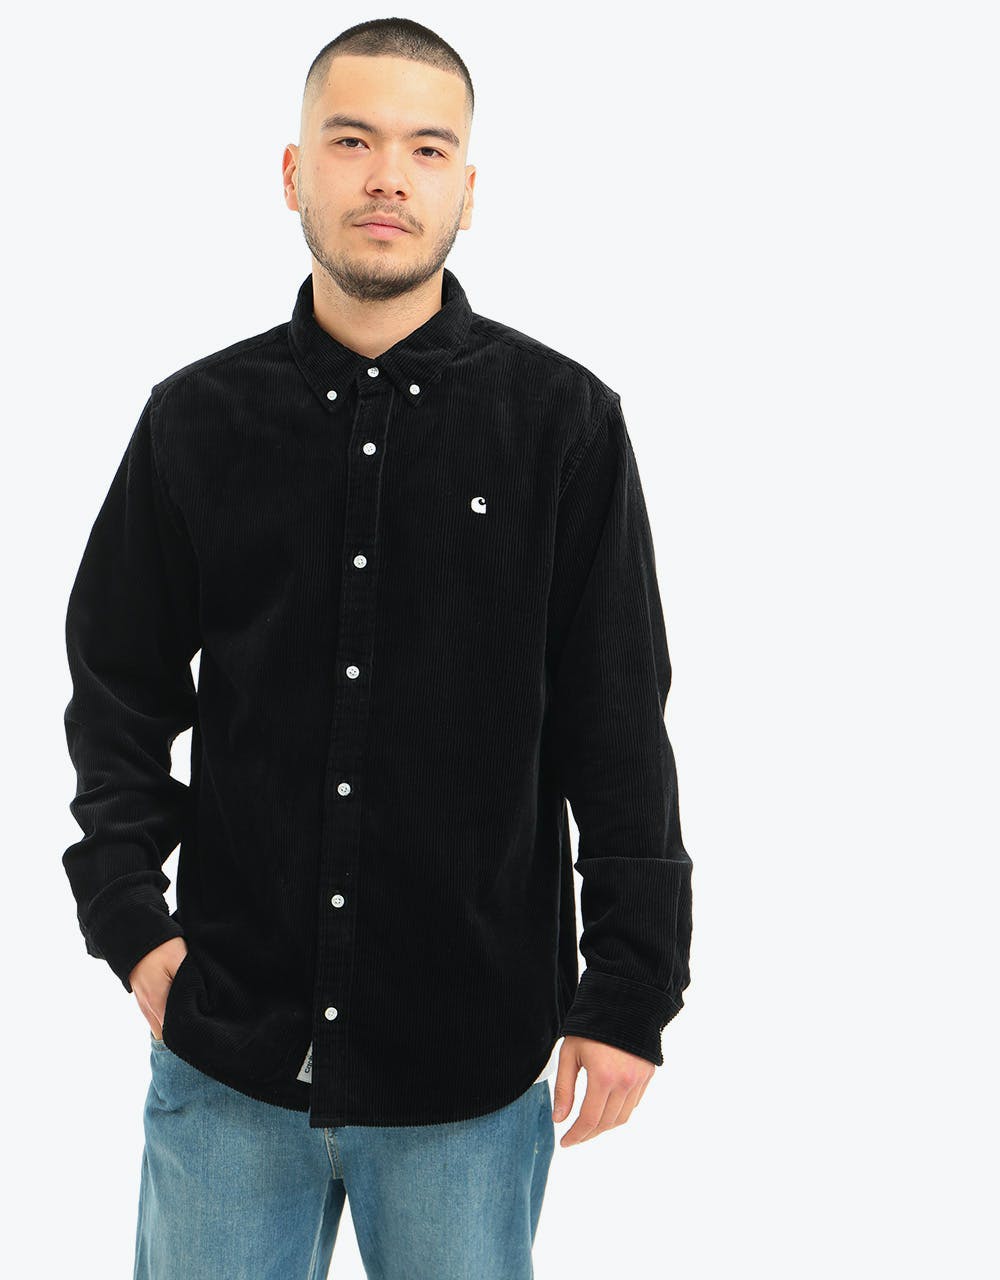 Carhartt WIP L/S Madison Cord Shirt - Black/Wax – Route One